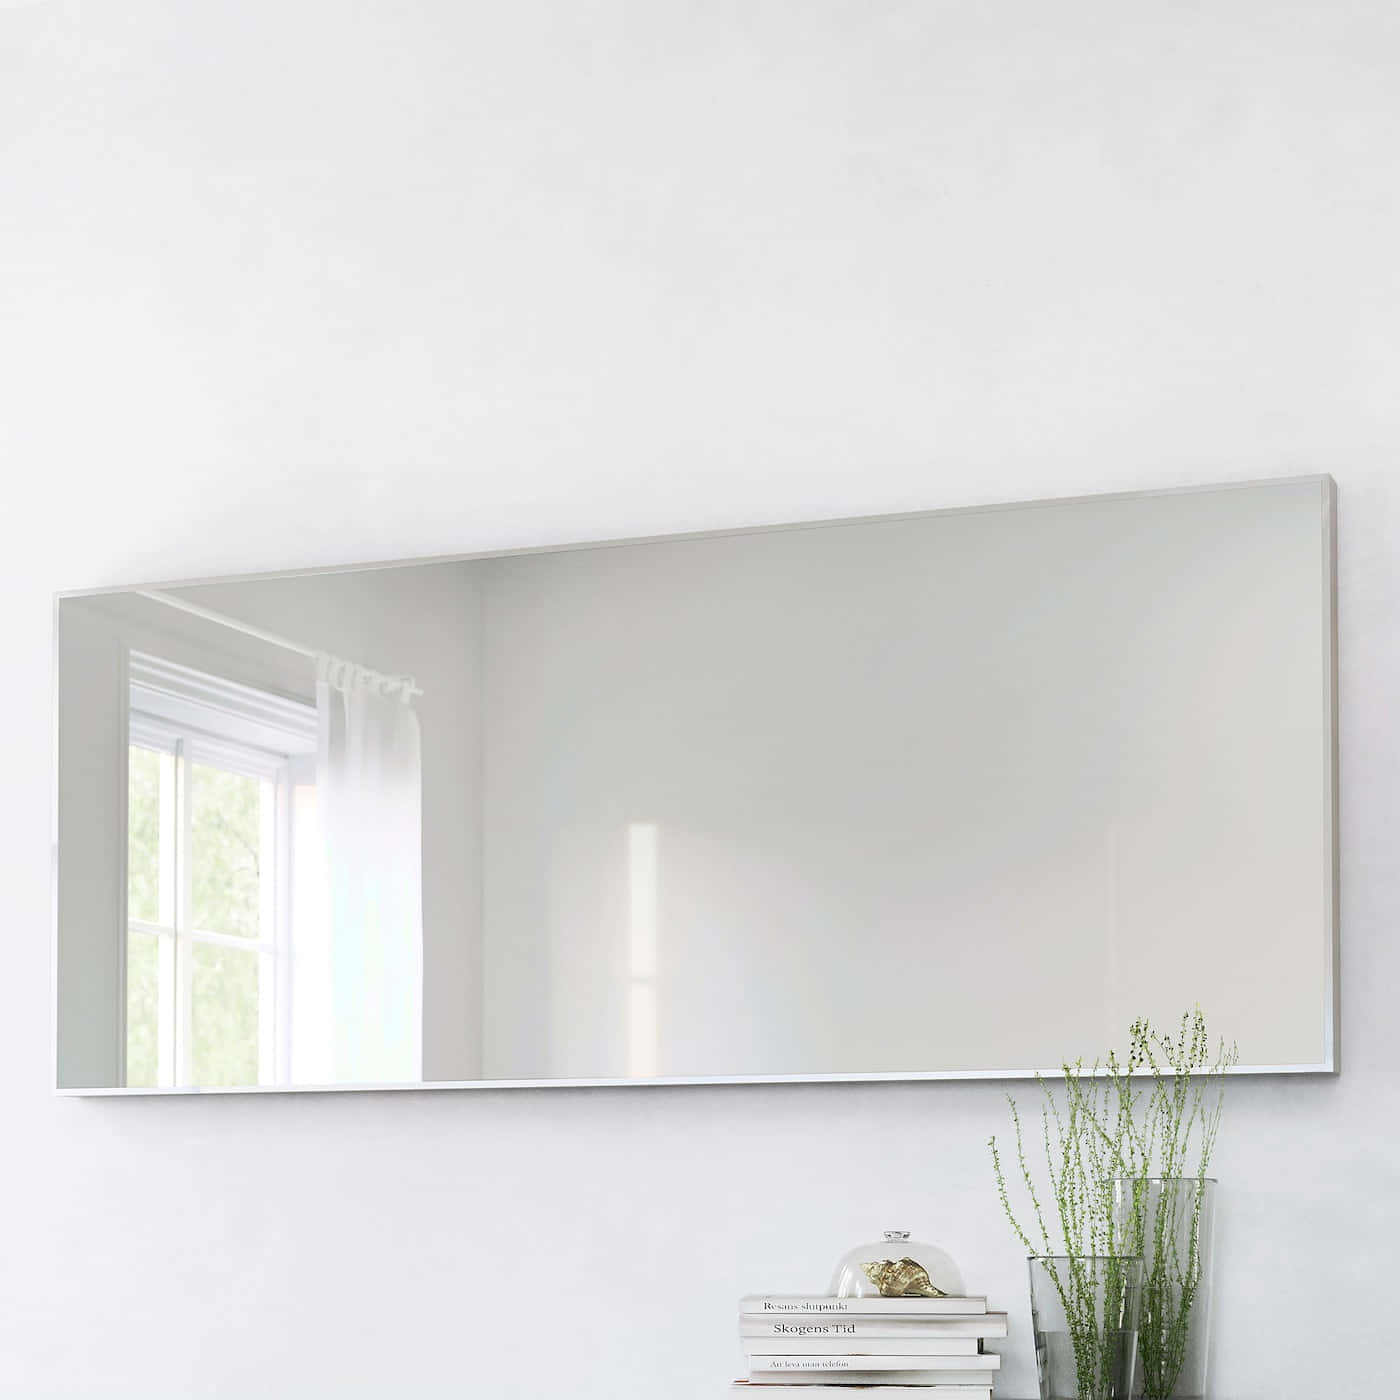 A Large Mirror Is Placed On A White Wall